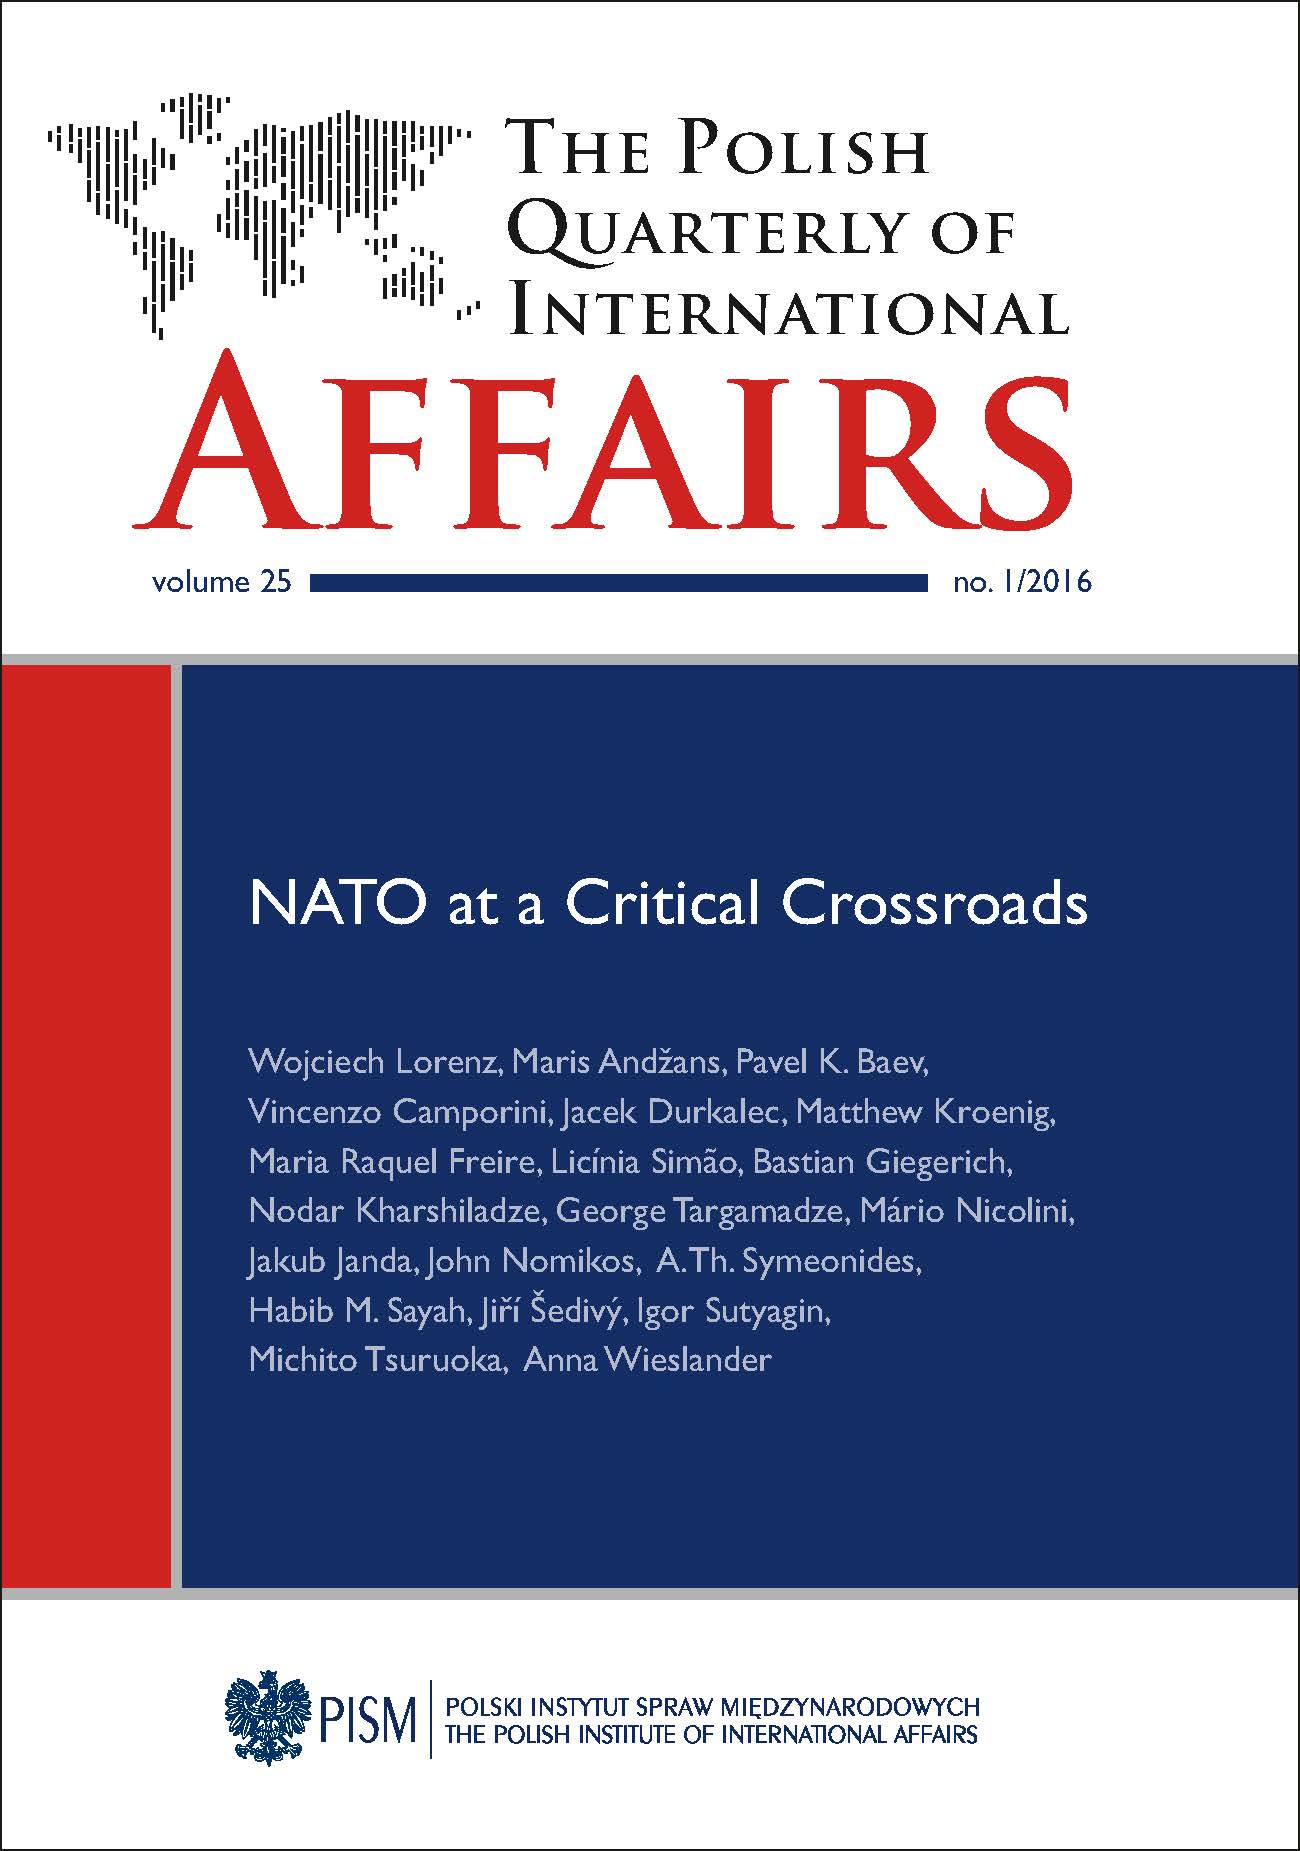 (Re)focusing the Atlantic Alliance: Reframing Security Readings into a Peace Agenda